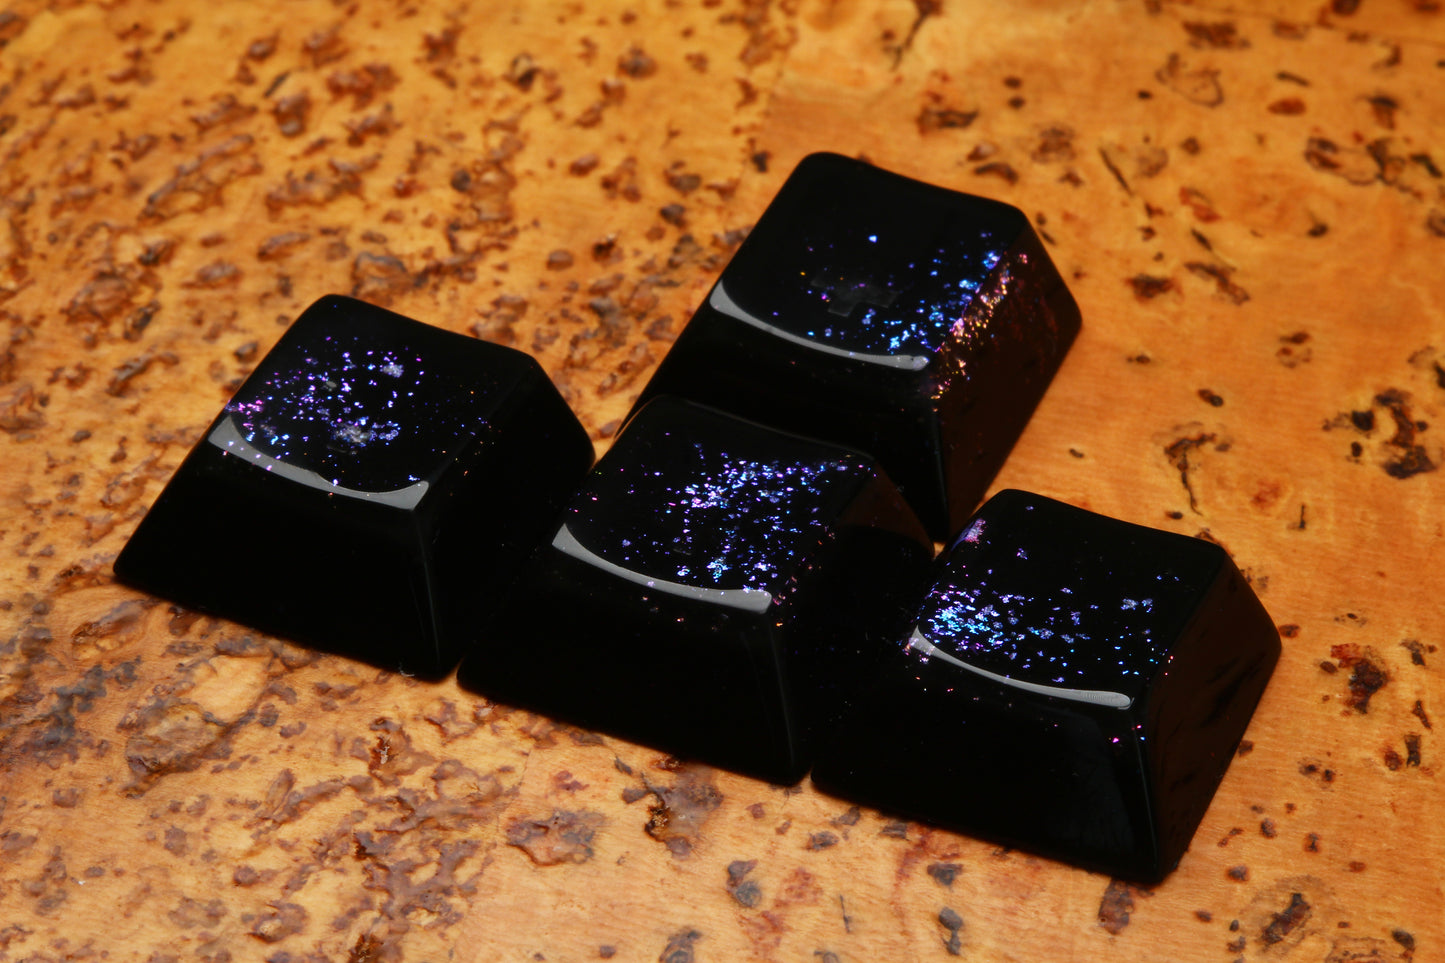 Cherry Profile Deep Field WASD - Hydroverse - PrimeCaps Keycap - Blank and Sculpted Artisan Keycaps for cherry MX mechanical keyboards 